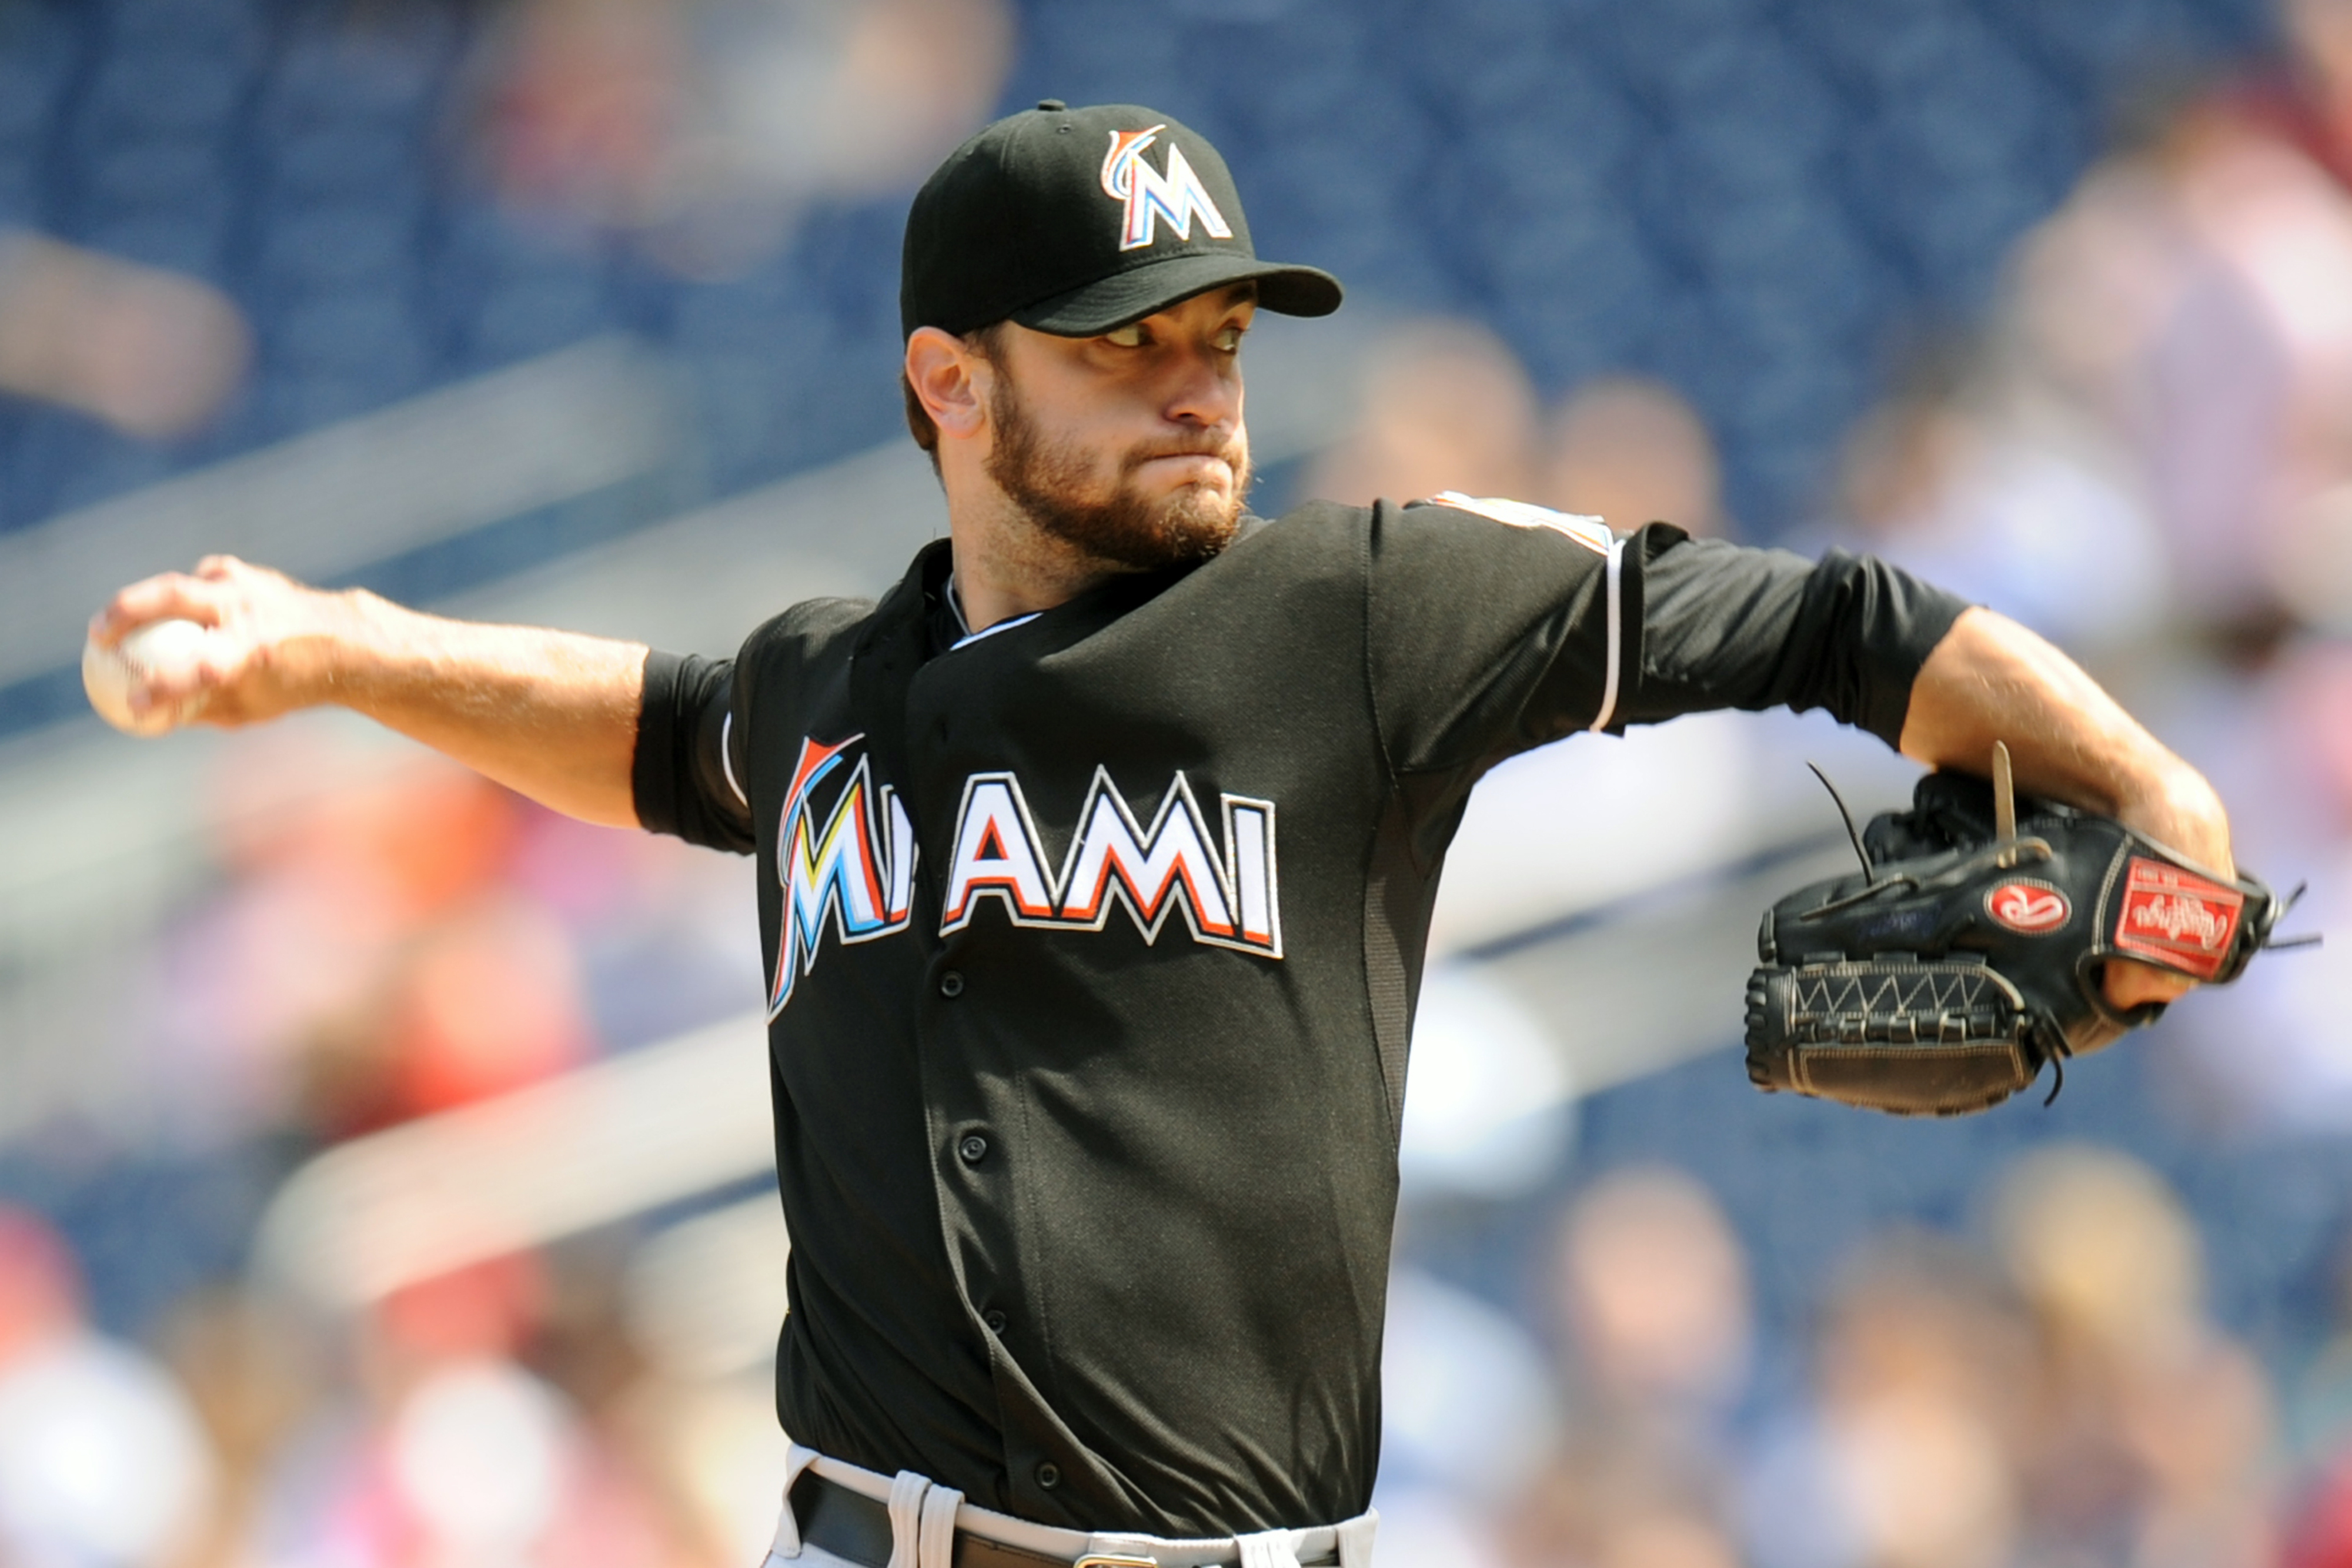 Jarred Cosart worked well for the Miami Marlins in limited time.